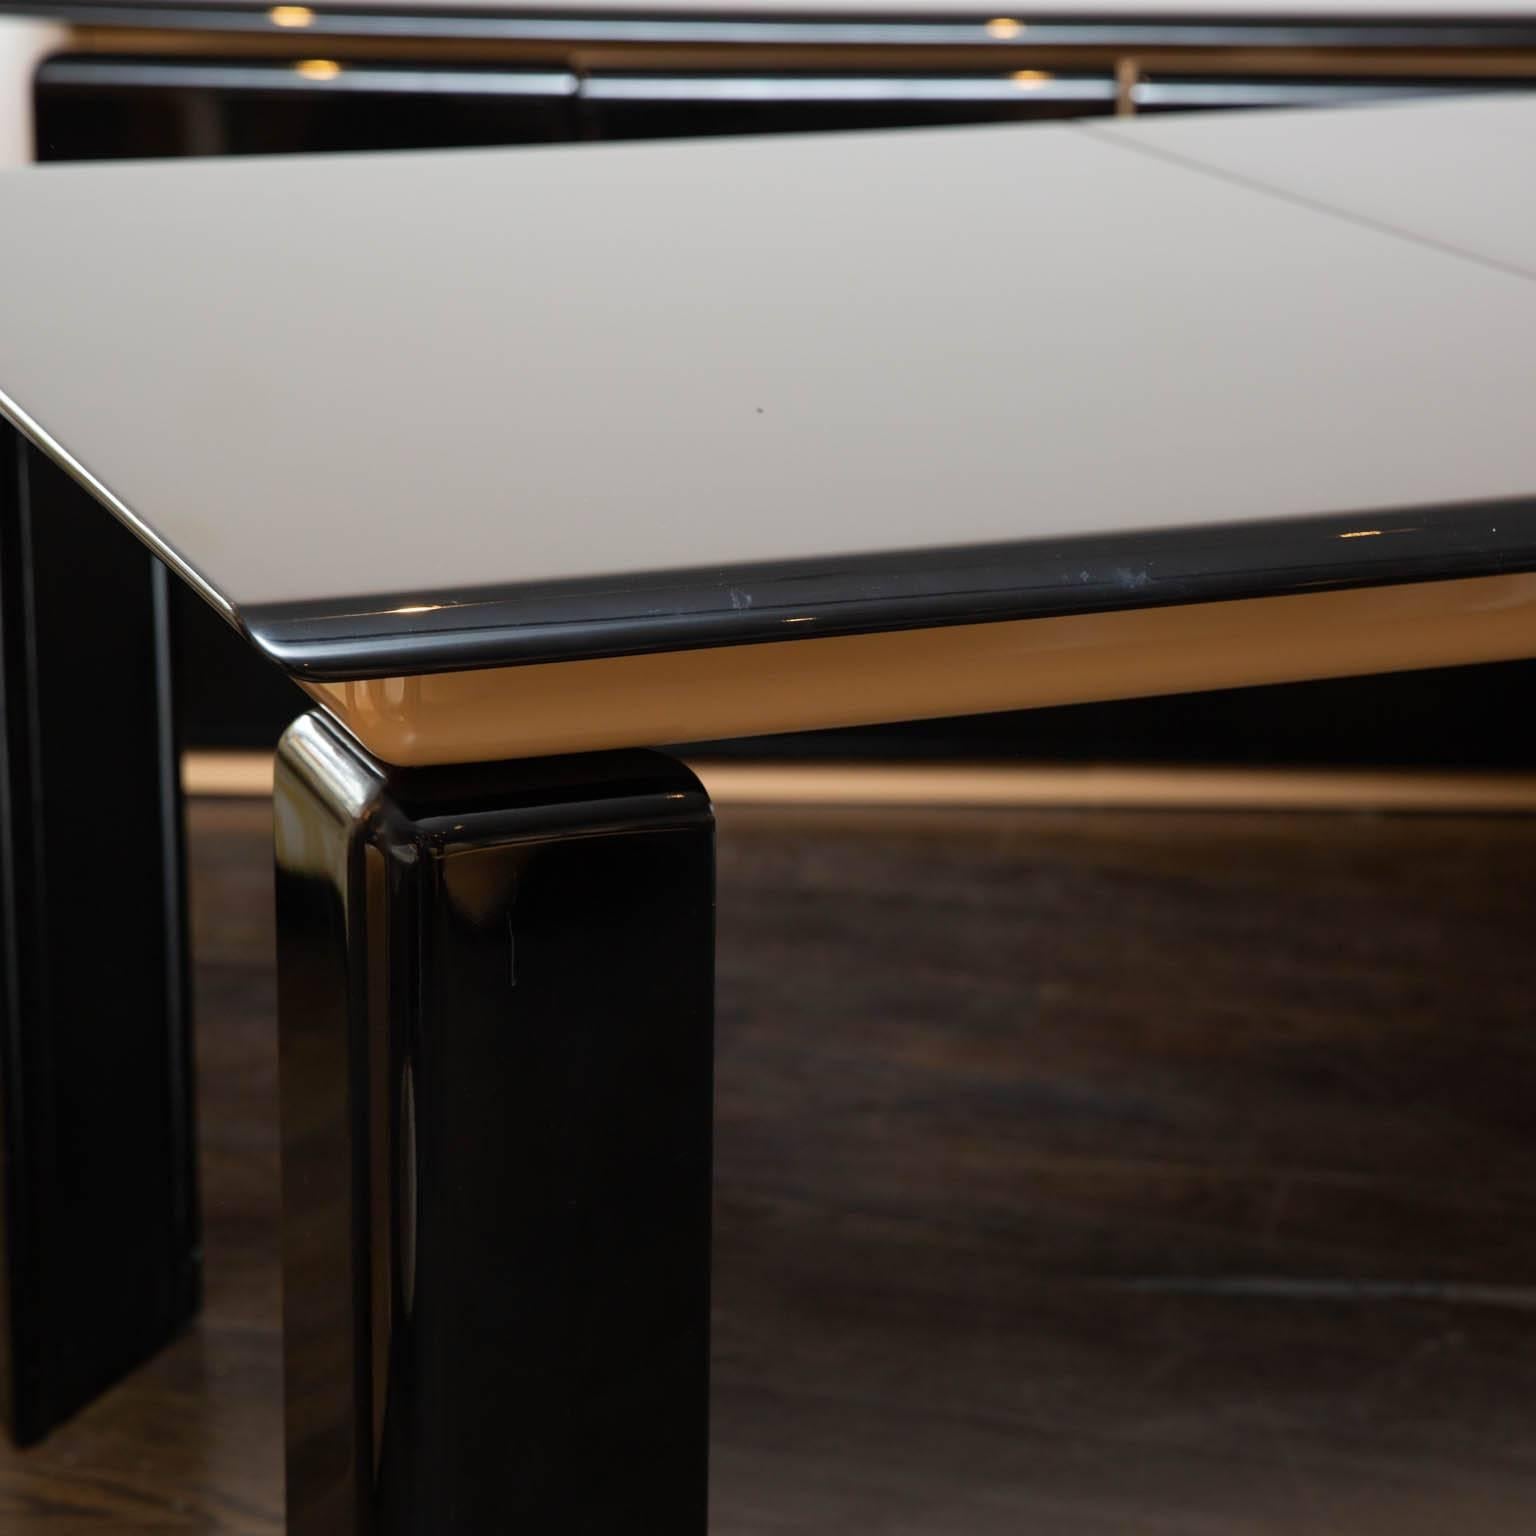 Clean black and tan lacquered dining table with angled legs. Made in Canada and designed by Roger Rougier. Does not come with leaves.